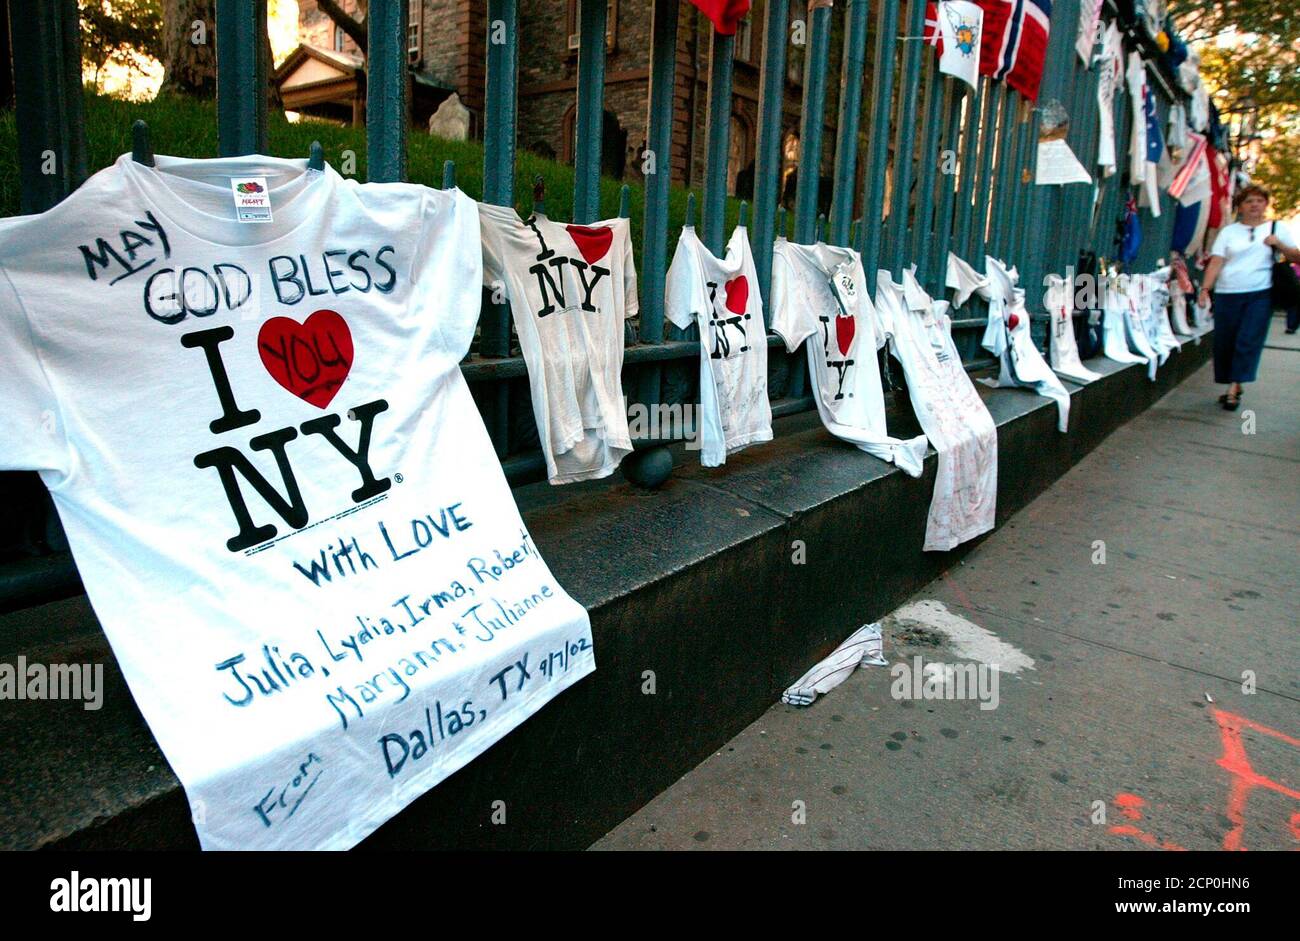 A T Shirt With A Message To New York From Residents Of Dallas Texas Hangs On A Fence In New York September 8 02 The Shirts Are On A Fence Around Trinity Church That Is Located Near The Former Site Of The World Trade Center Known As Ground Zero